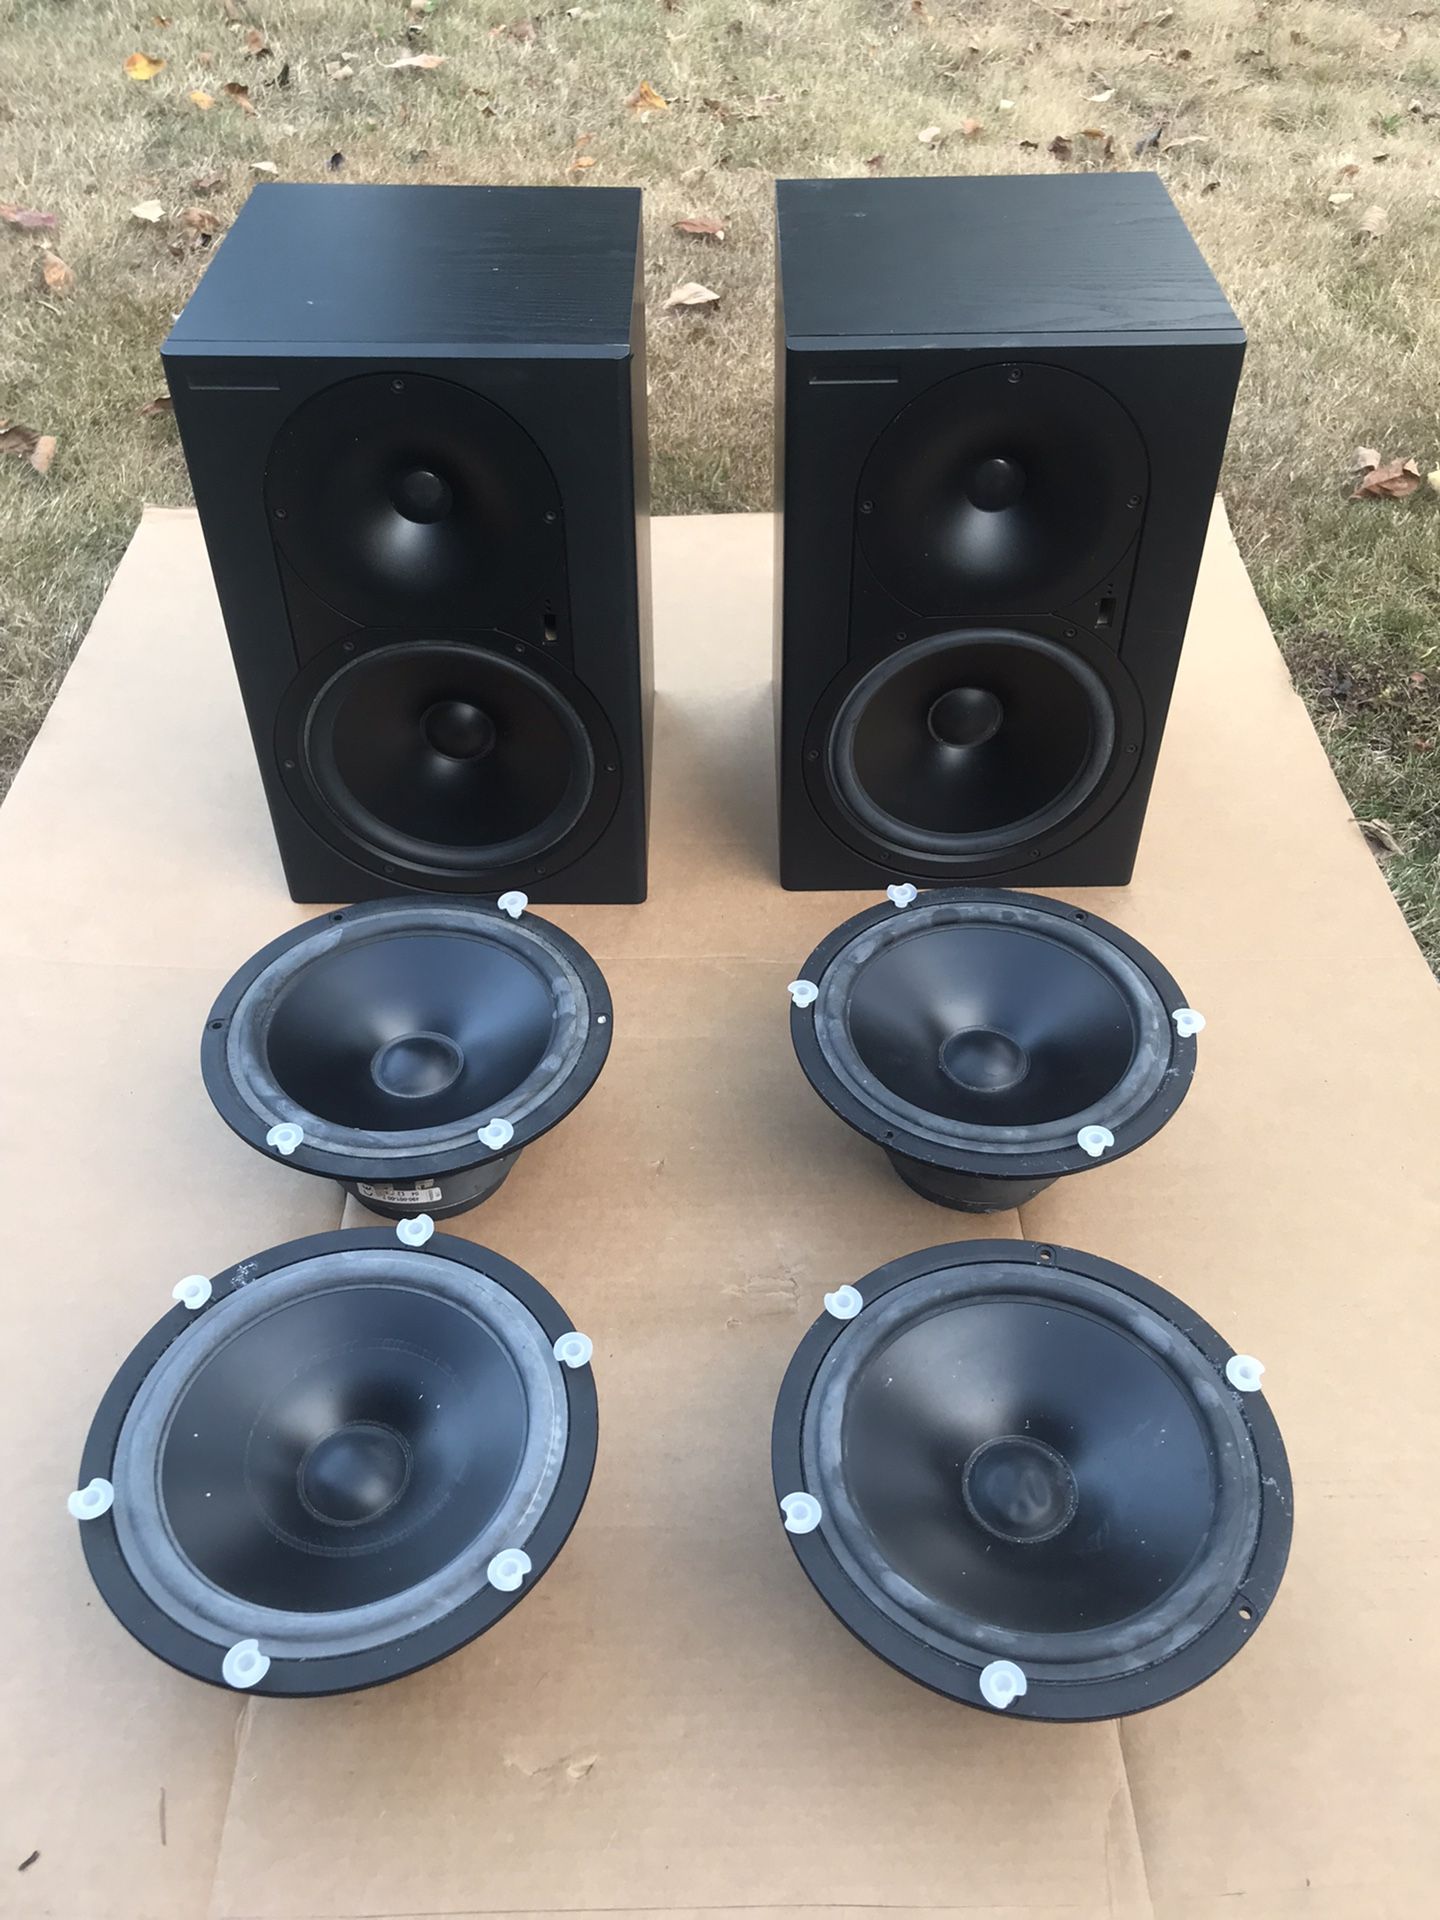 Mackie HR 824 Studio Monitor Cabinets And Speakers